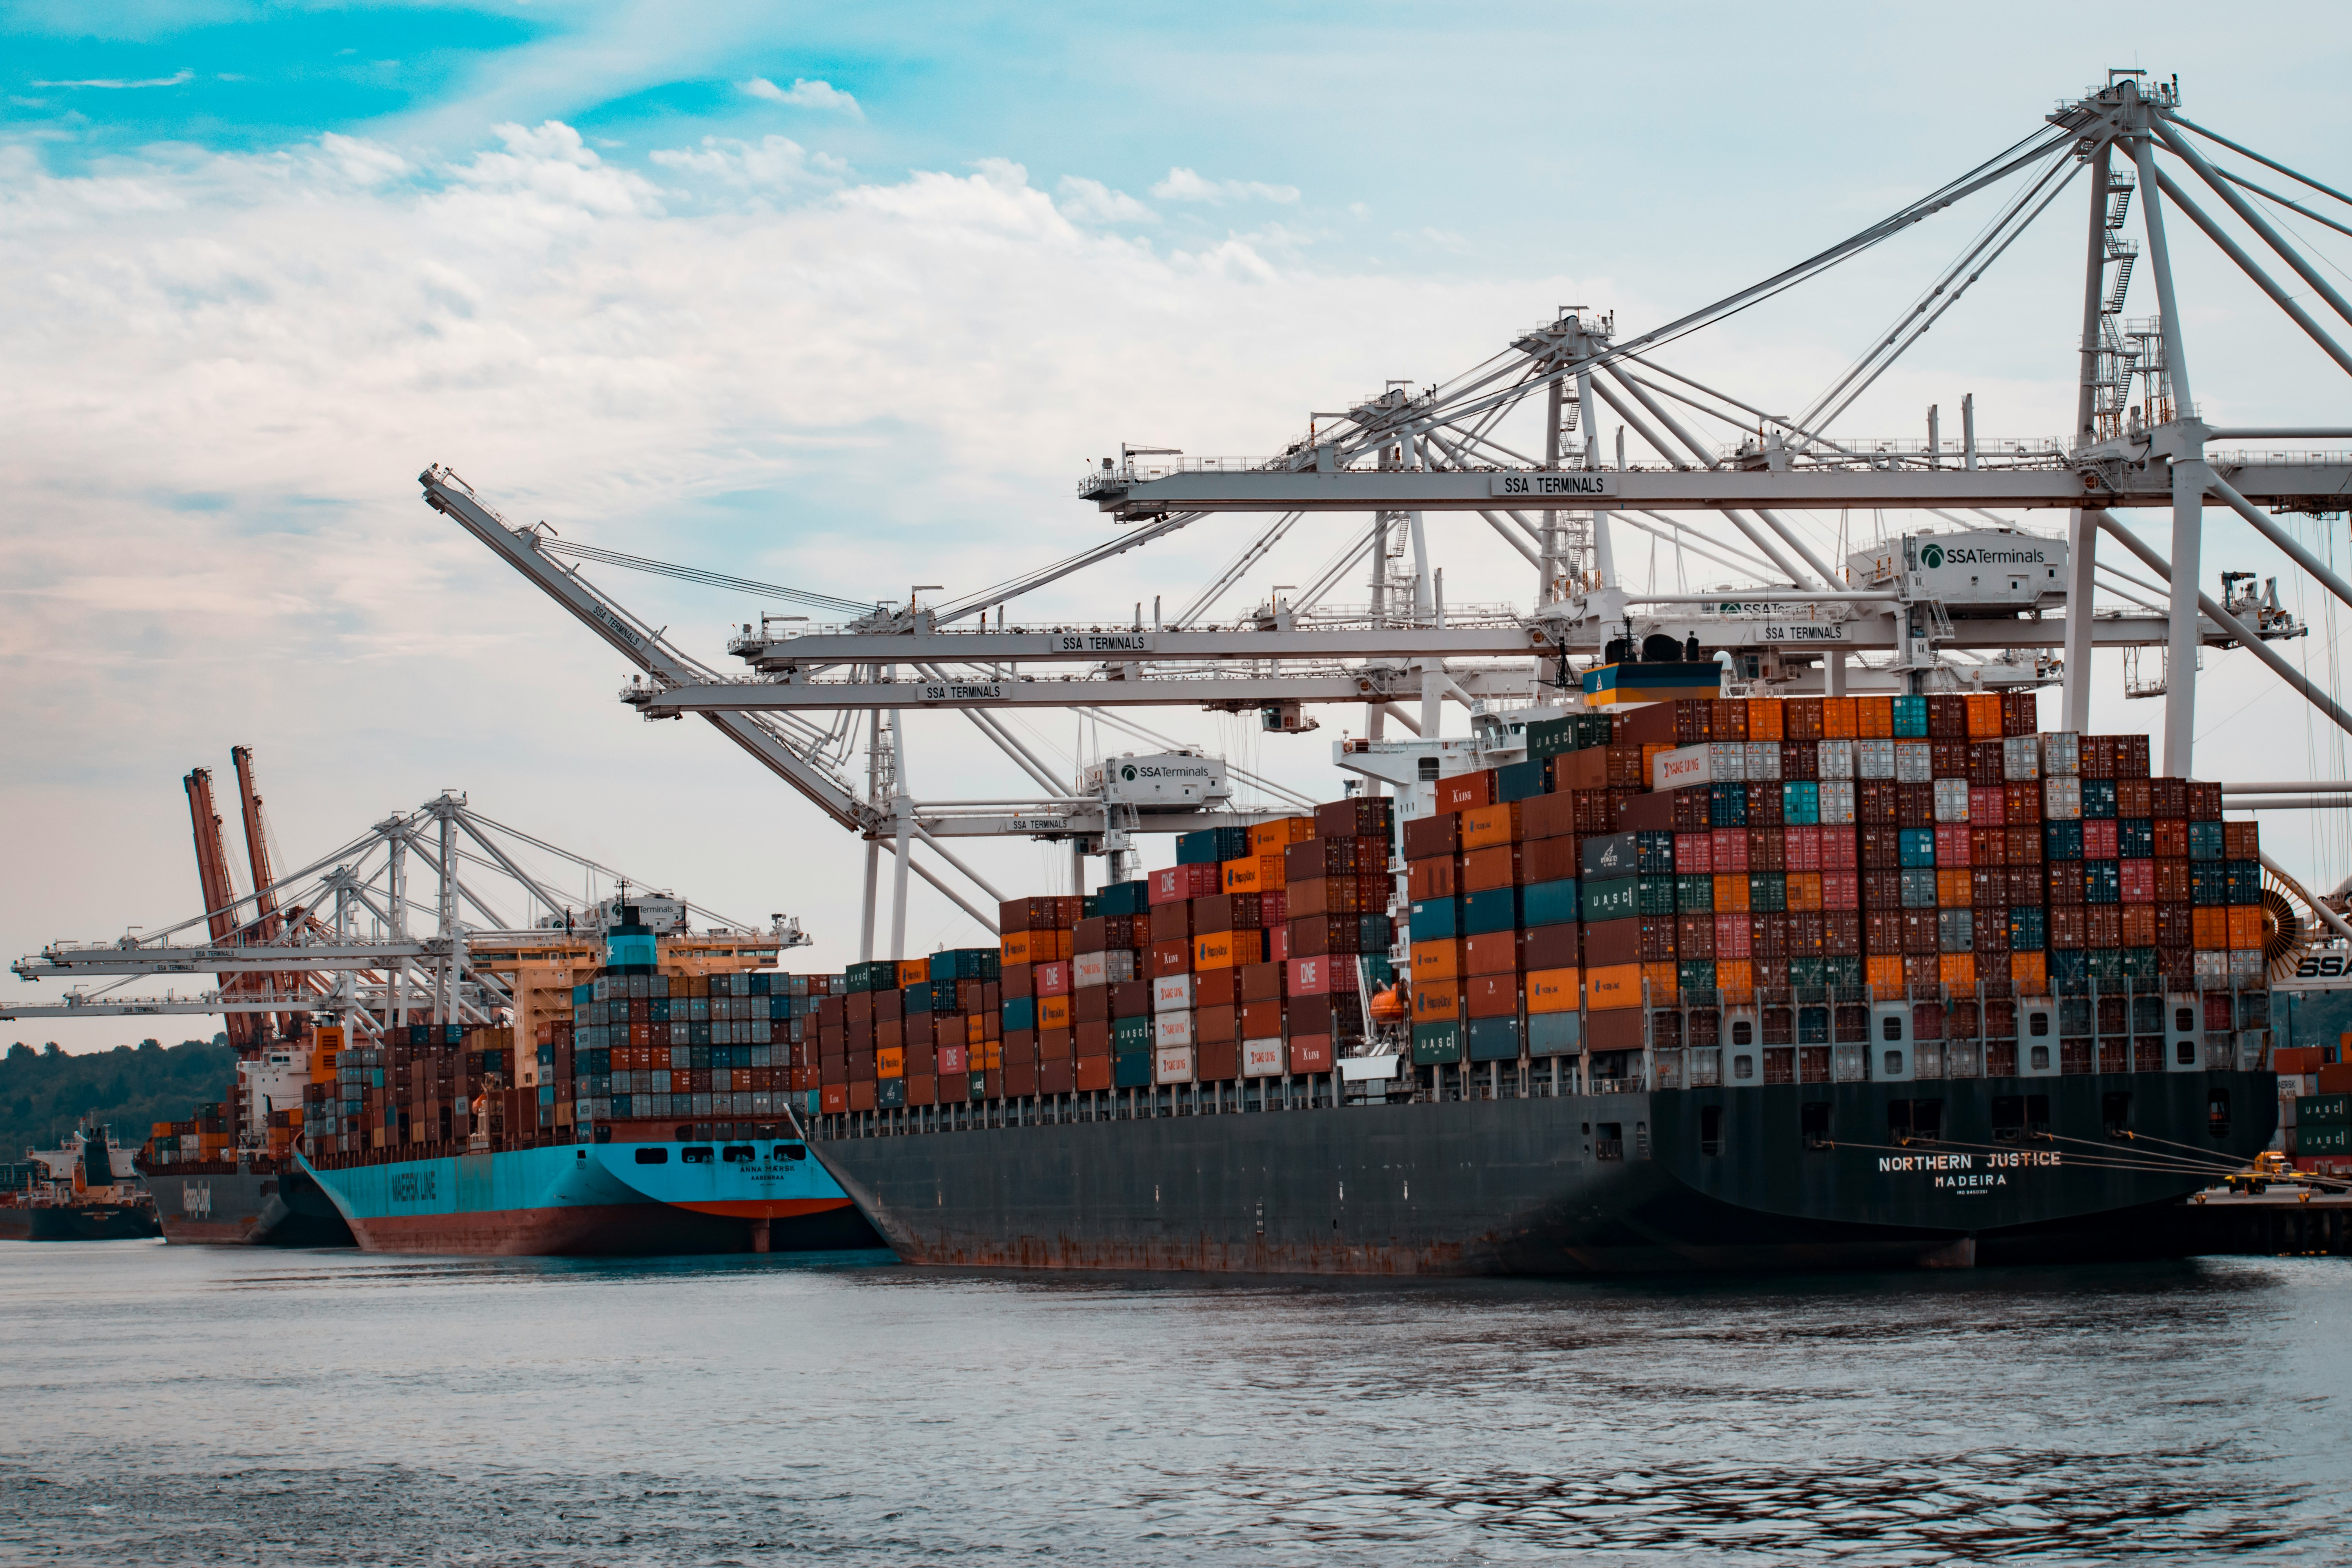 Satellite IoT can ensure holiday shipping runs smoothly